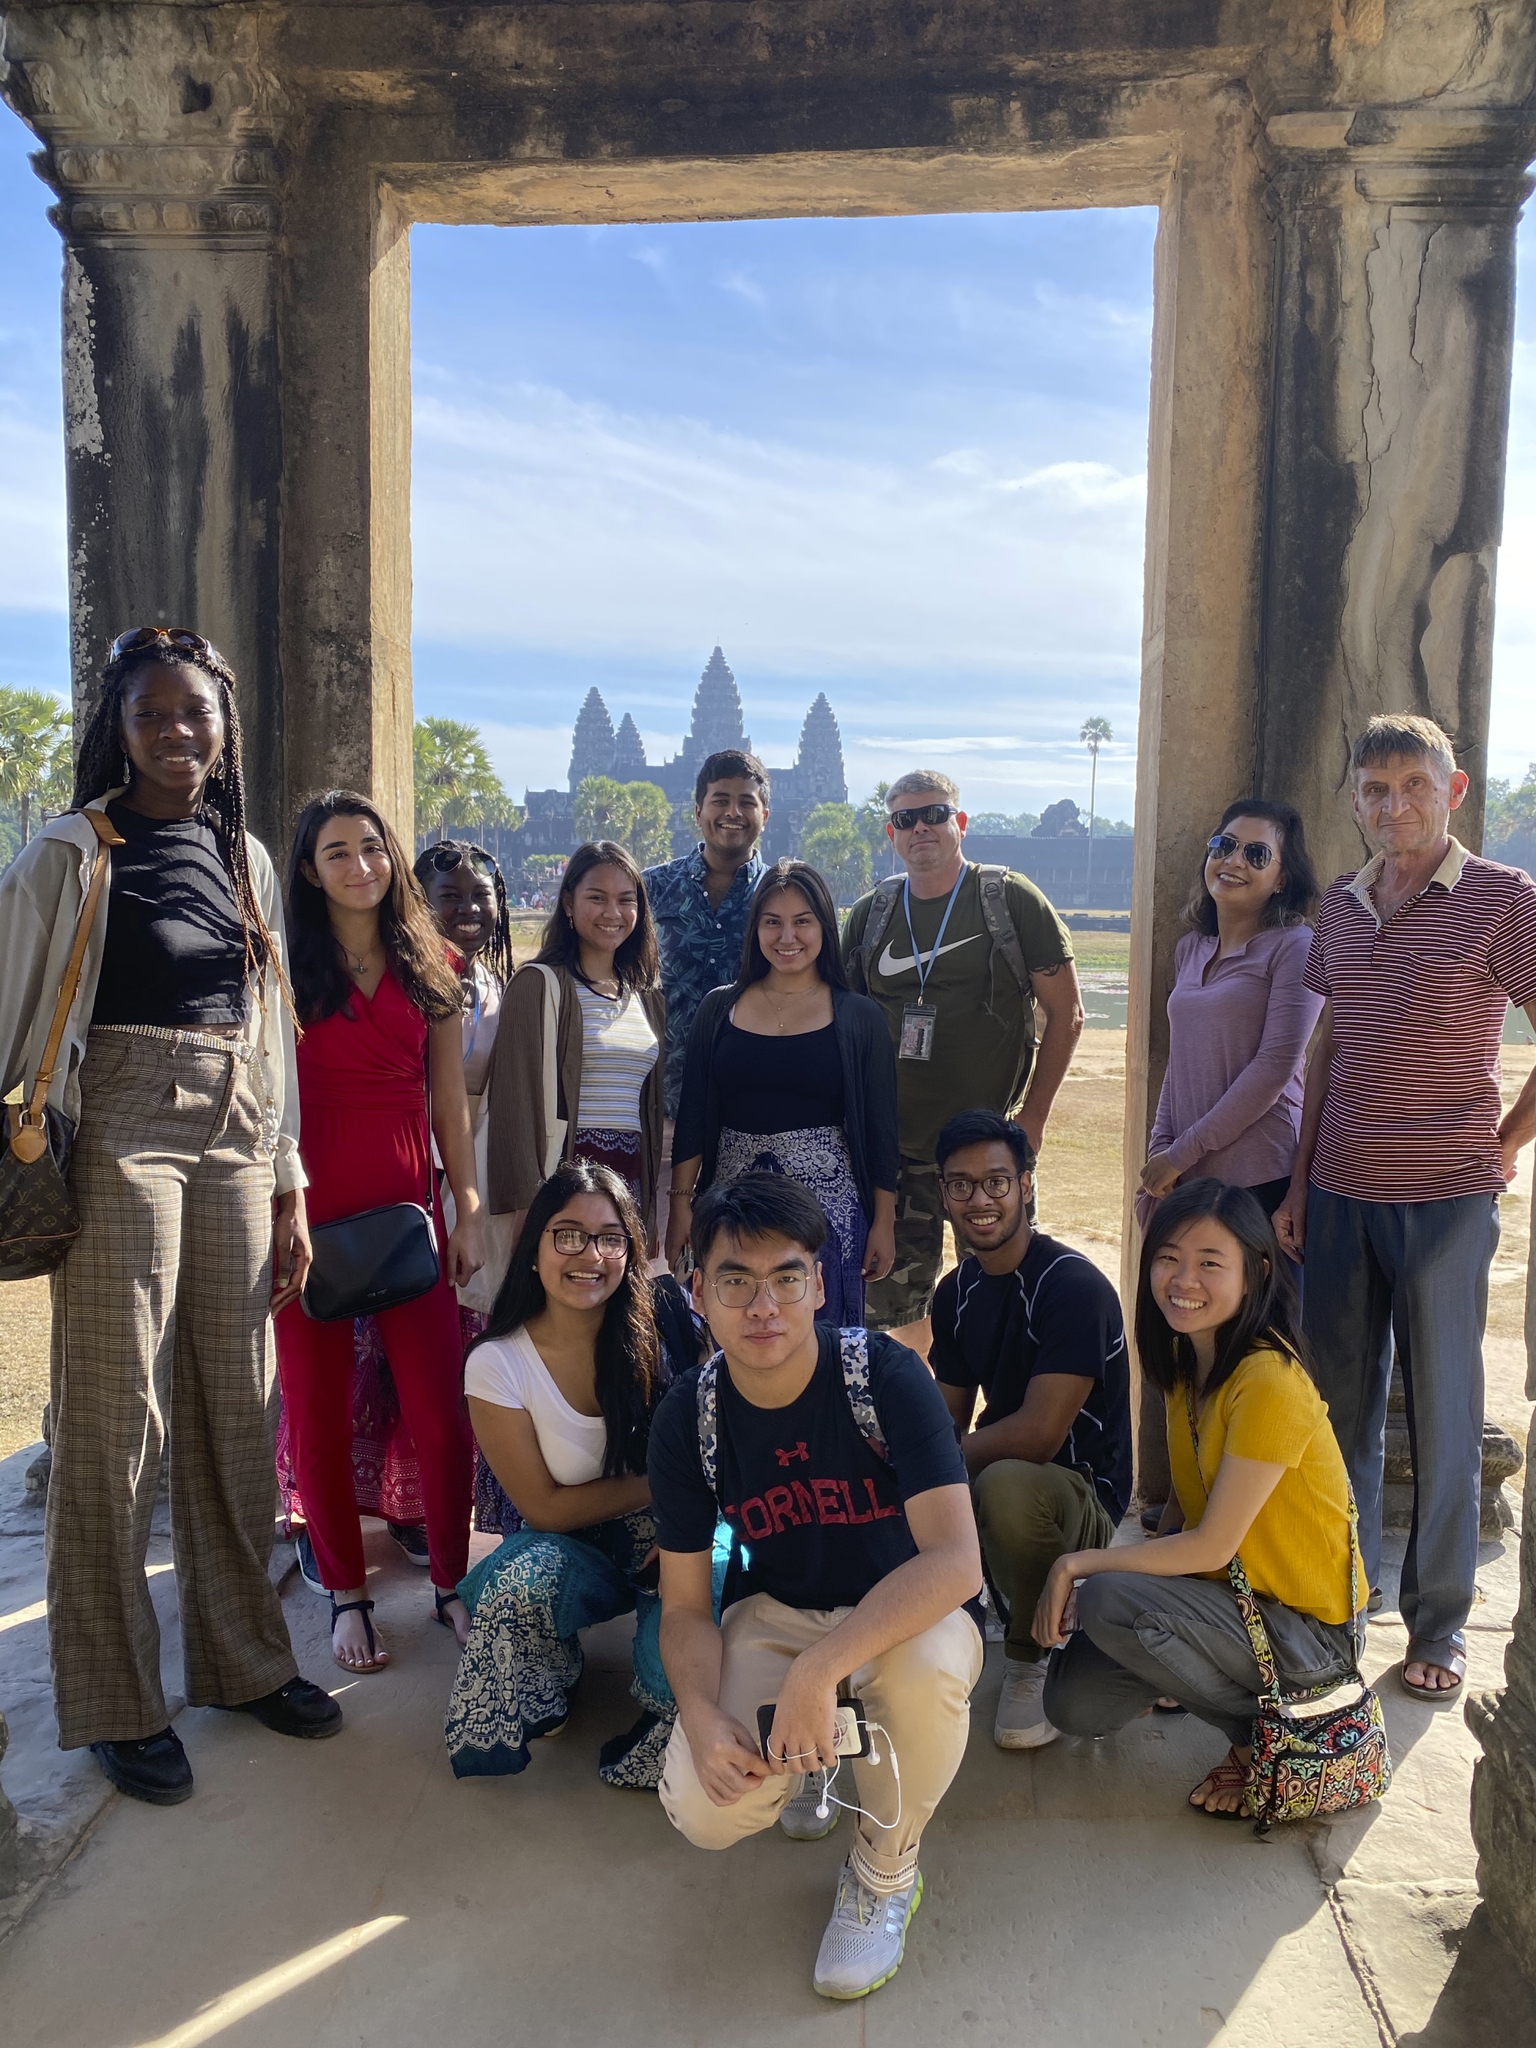 Cornell students pose in front of Ankor Wat